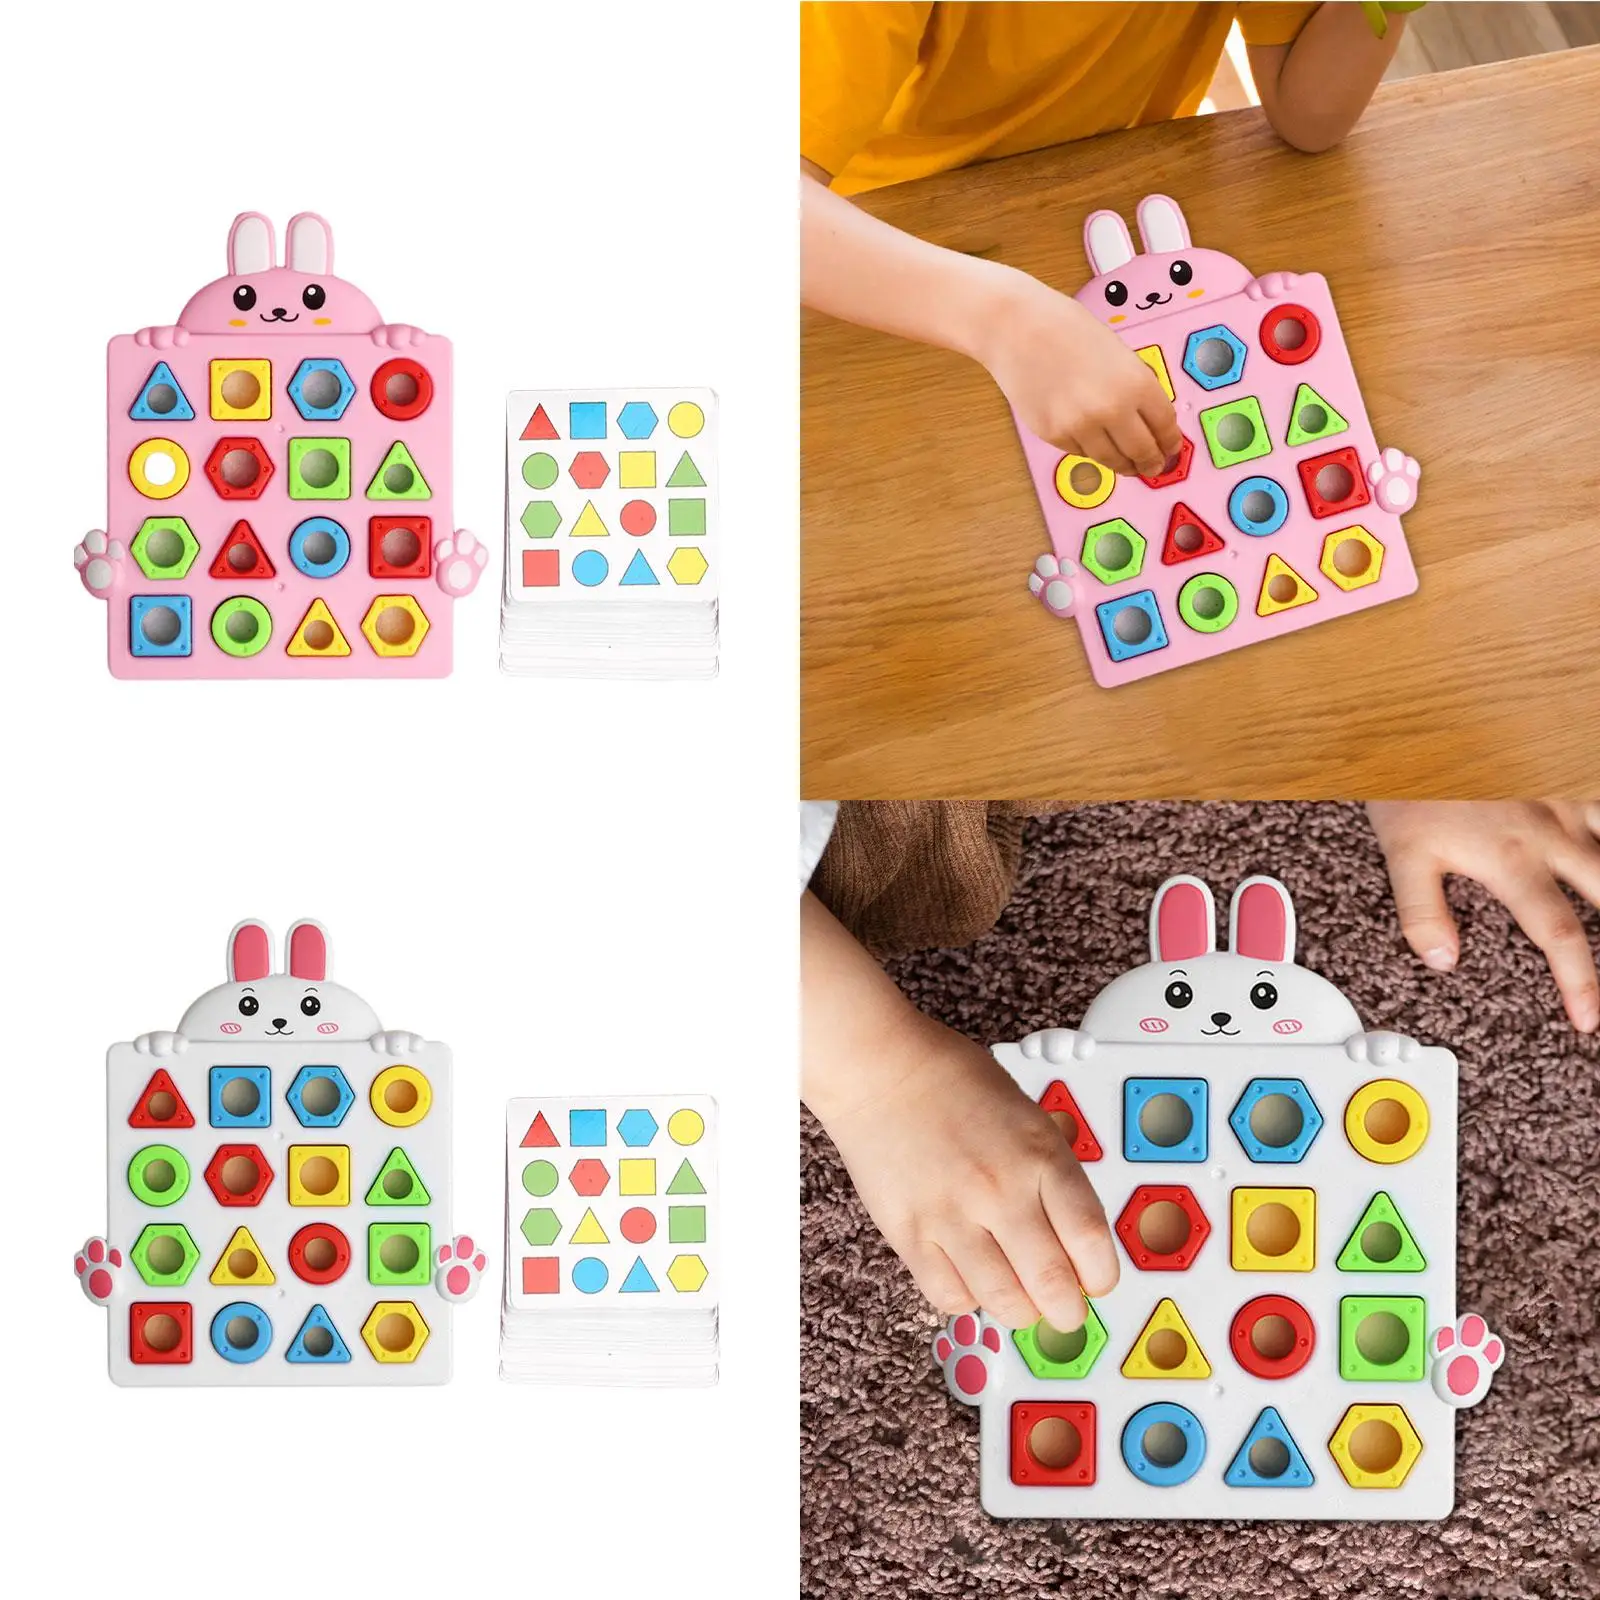 Shape Matching Puzzle Busy Board Shape Color Recognition Educational Toy for Kids Ages 3 4 5 Years Old Boys Girls Gift Preschool